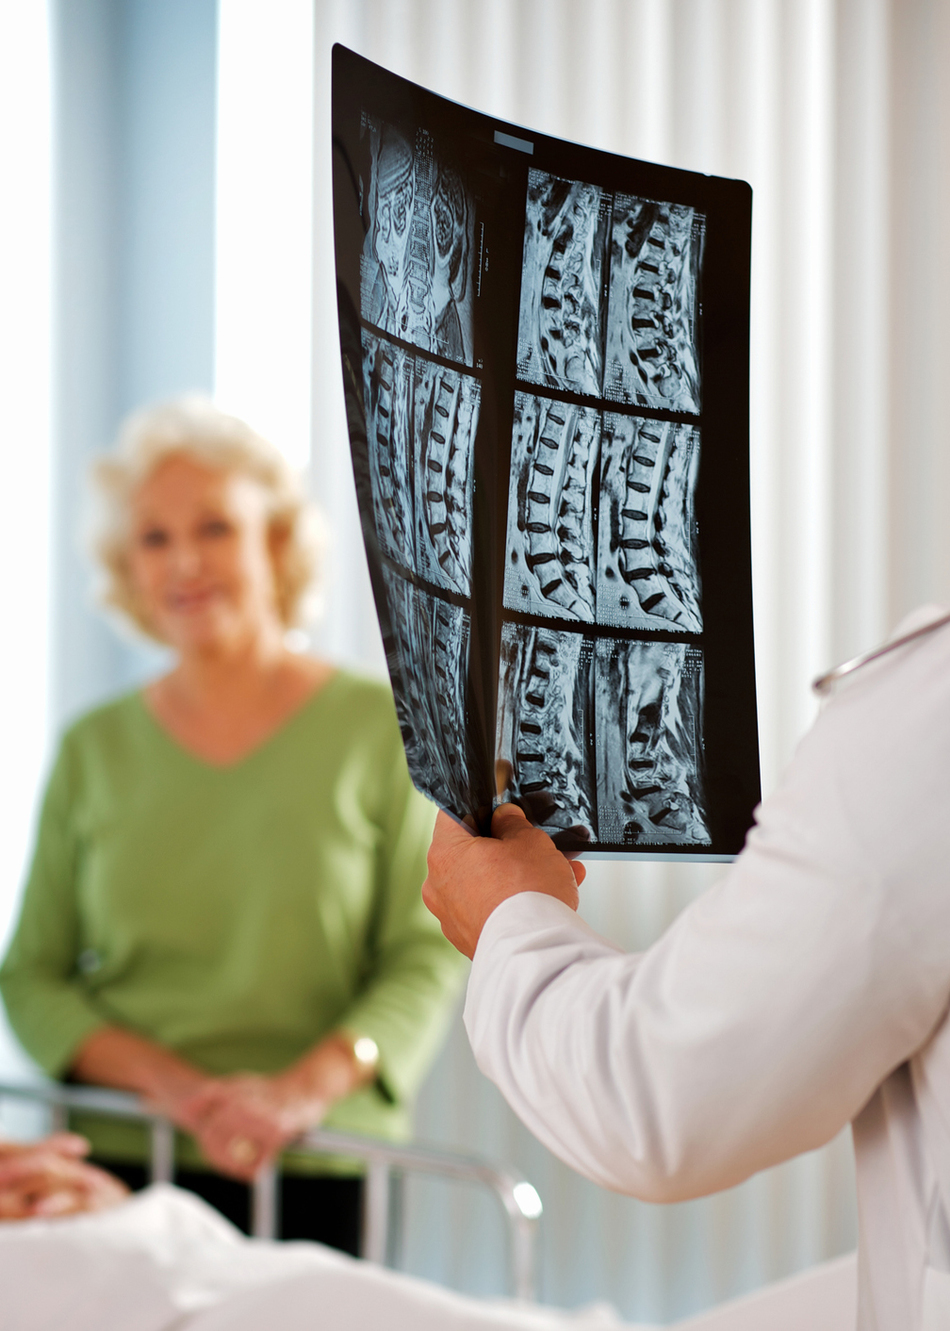 What to Expect After Endoscopic Spine Surgery